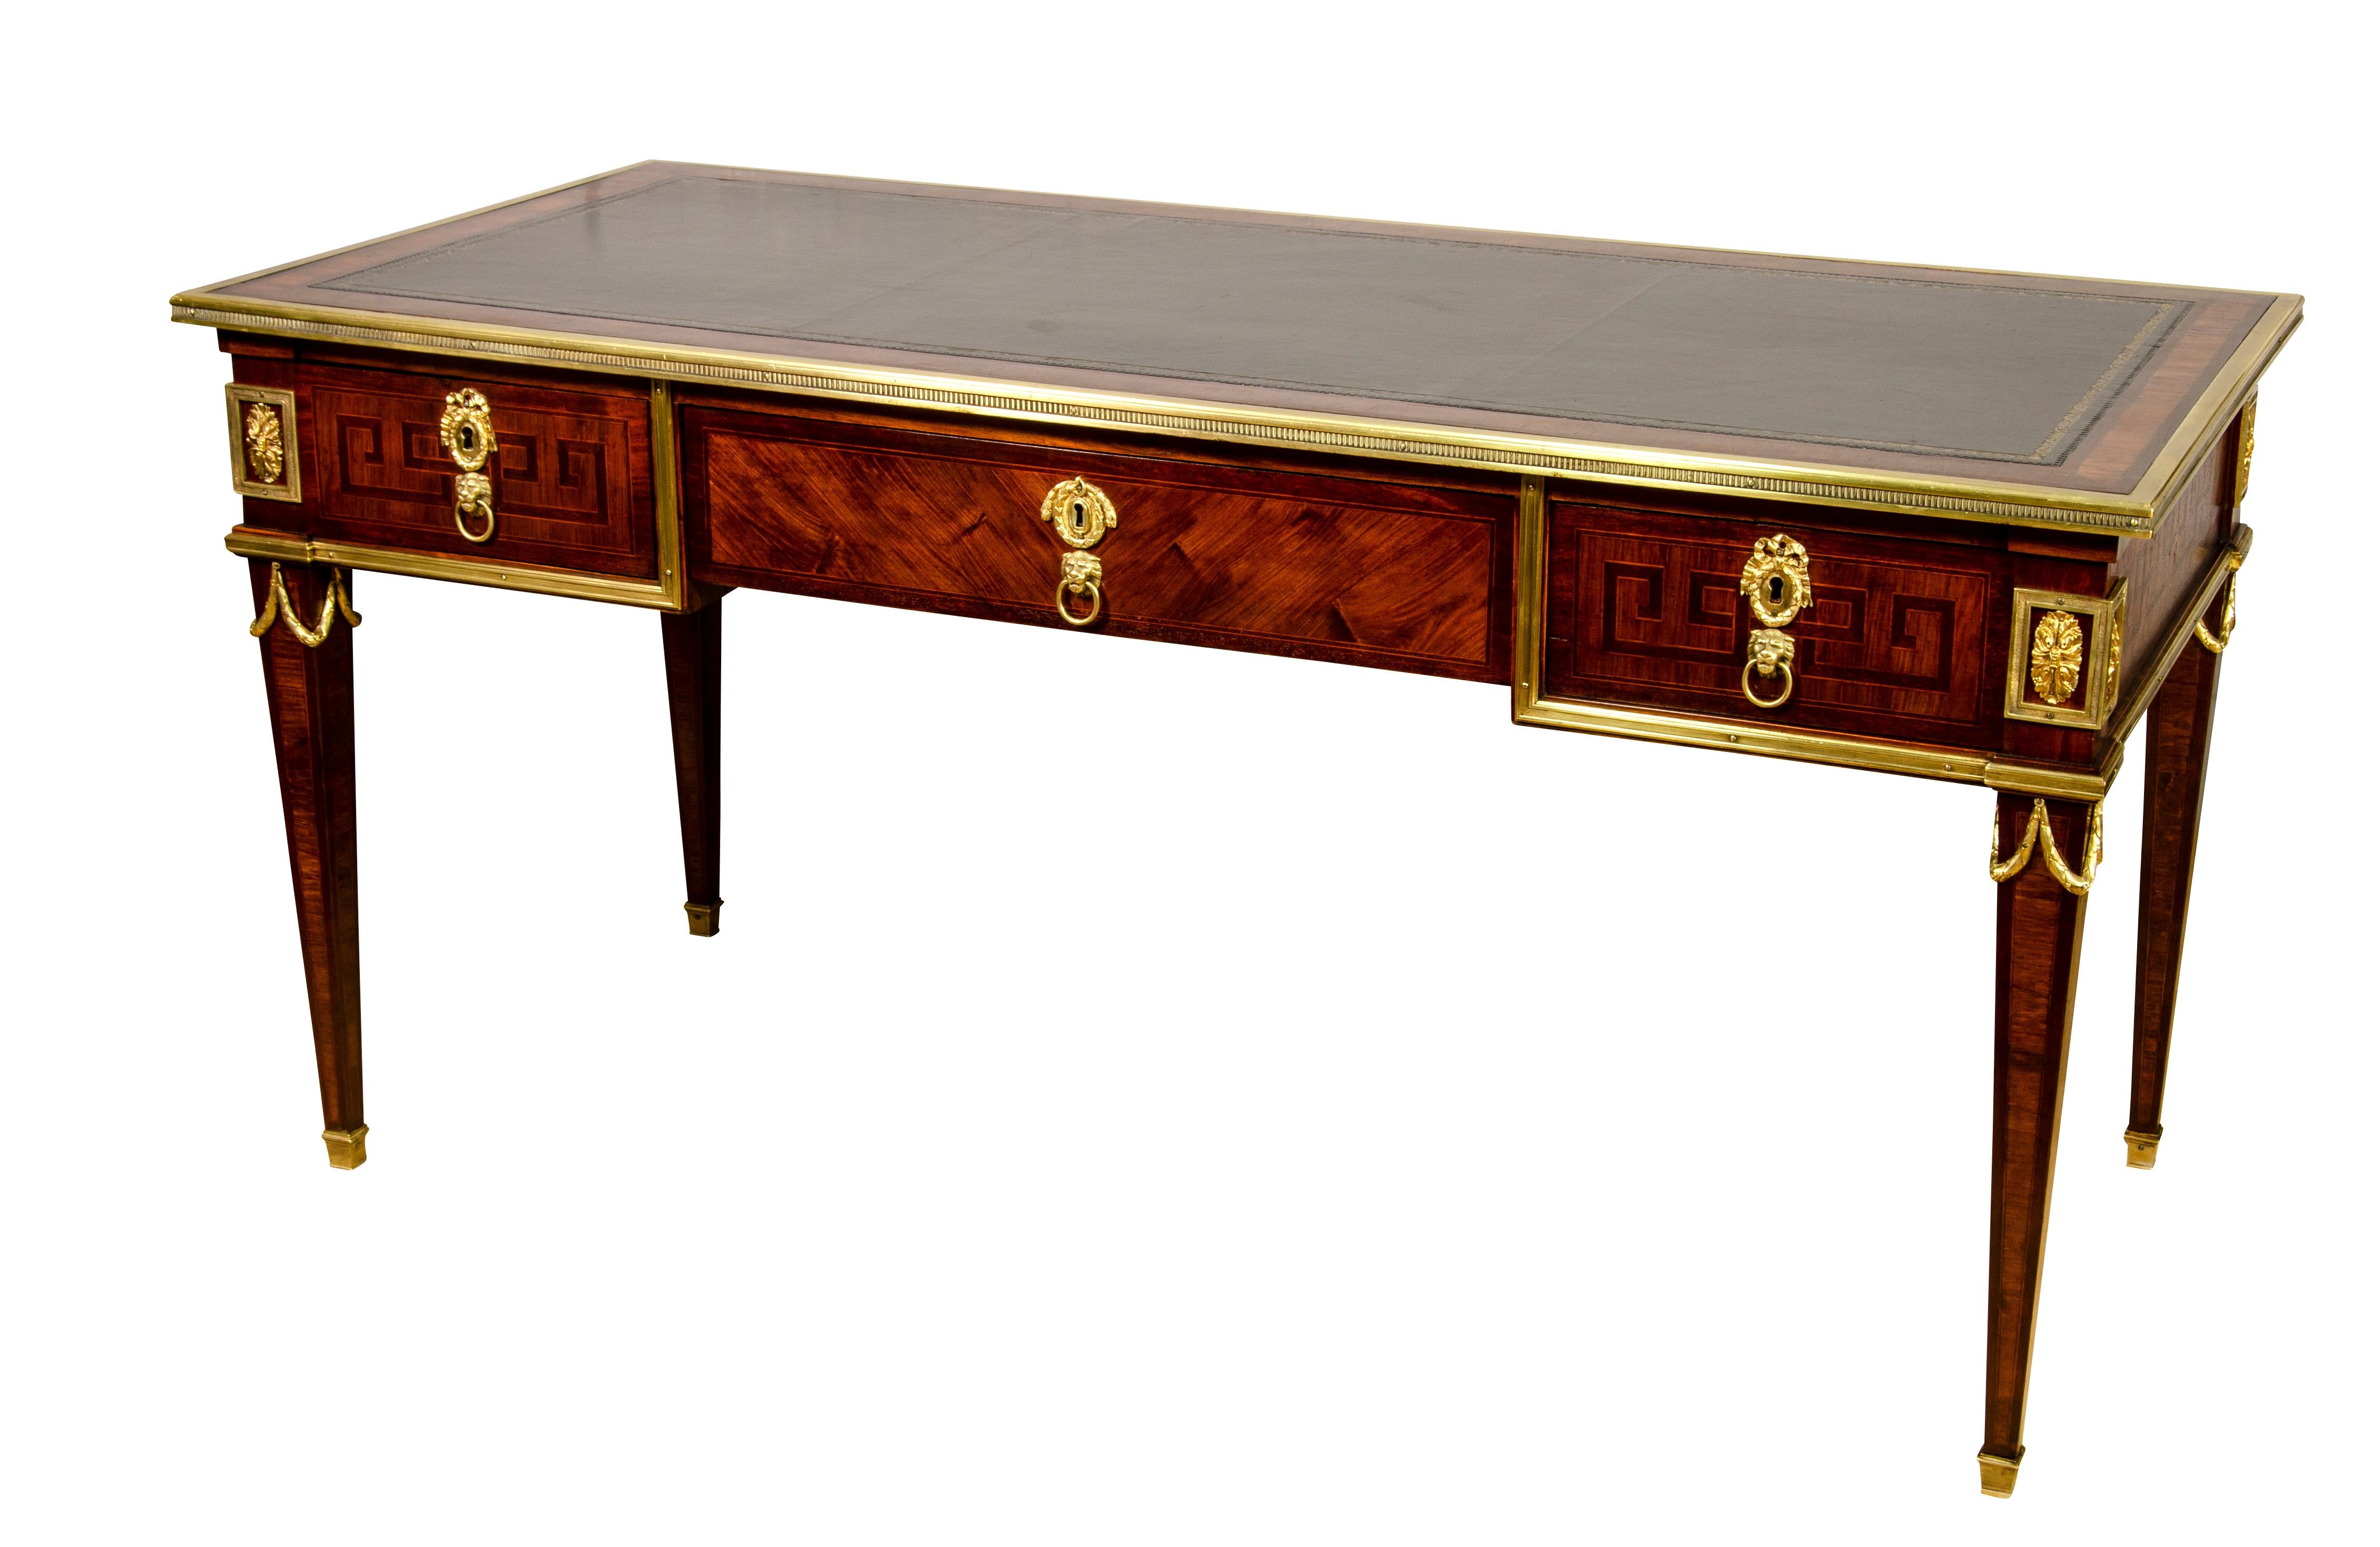 Rectangular inset tooled black leather top with cross banded edge and brass border over a frieze with a central and two flanking drawers, raised on square tapered legs headed by gilt bronze mounts , back finished to stand freely in a room.